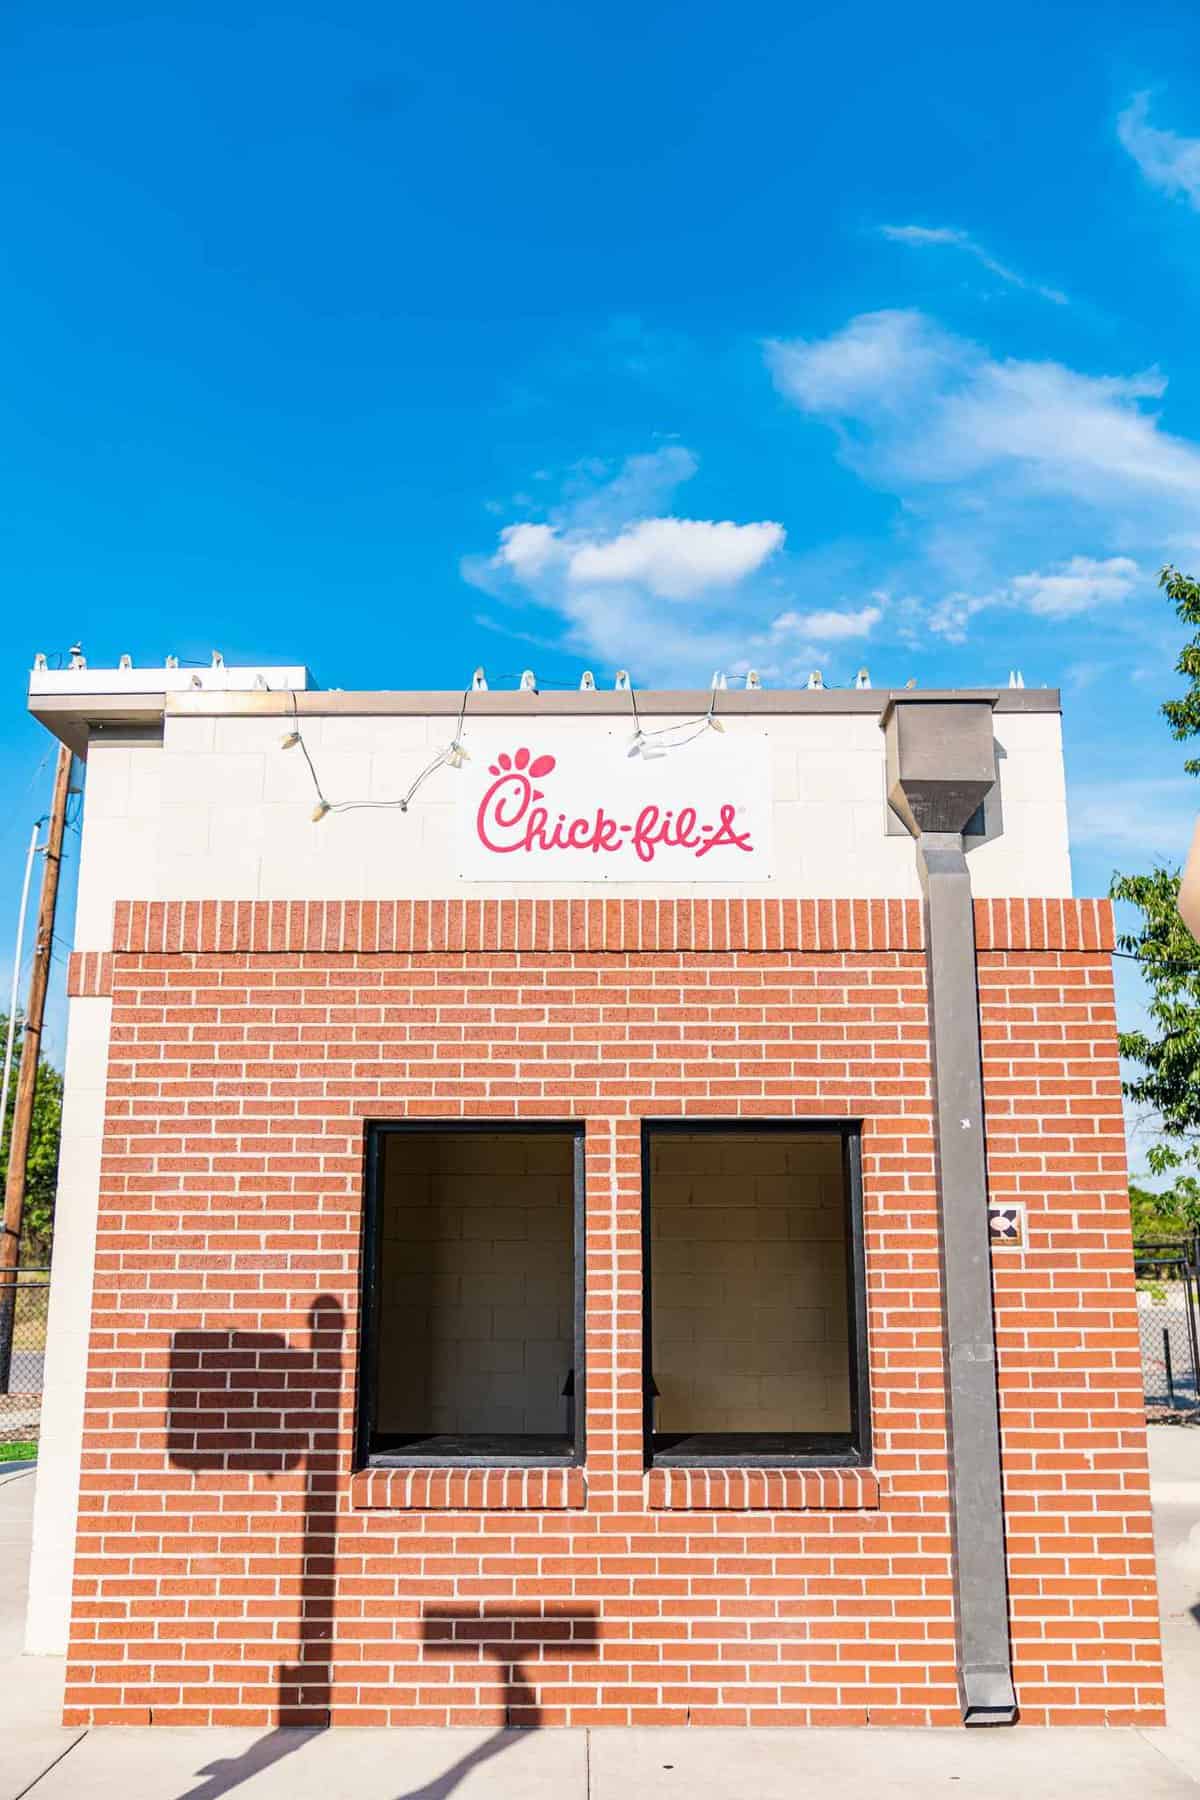 Chic-fil-A brick building with 2 big open windows